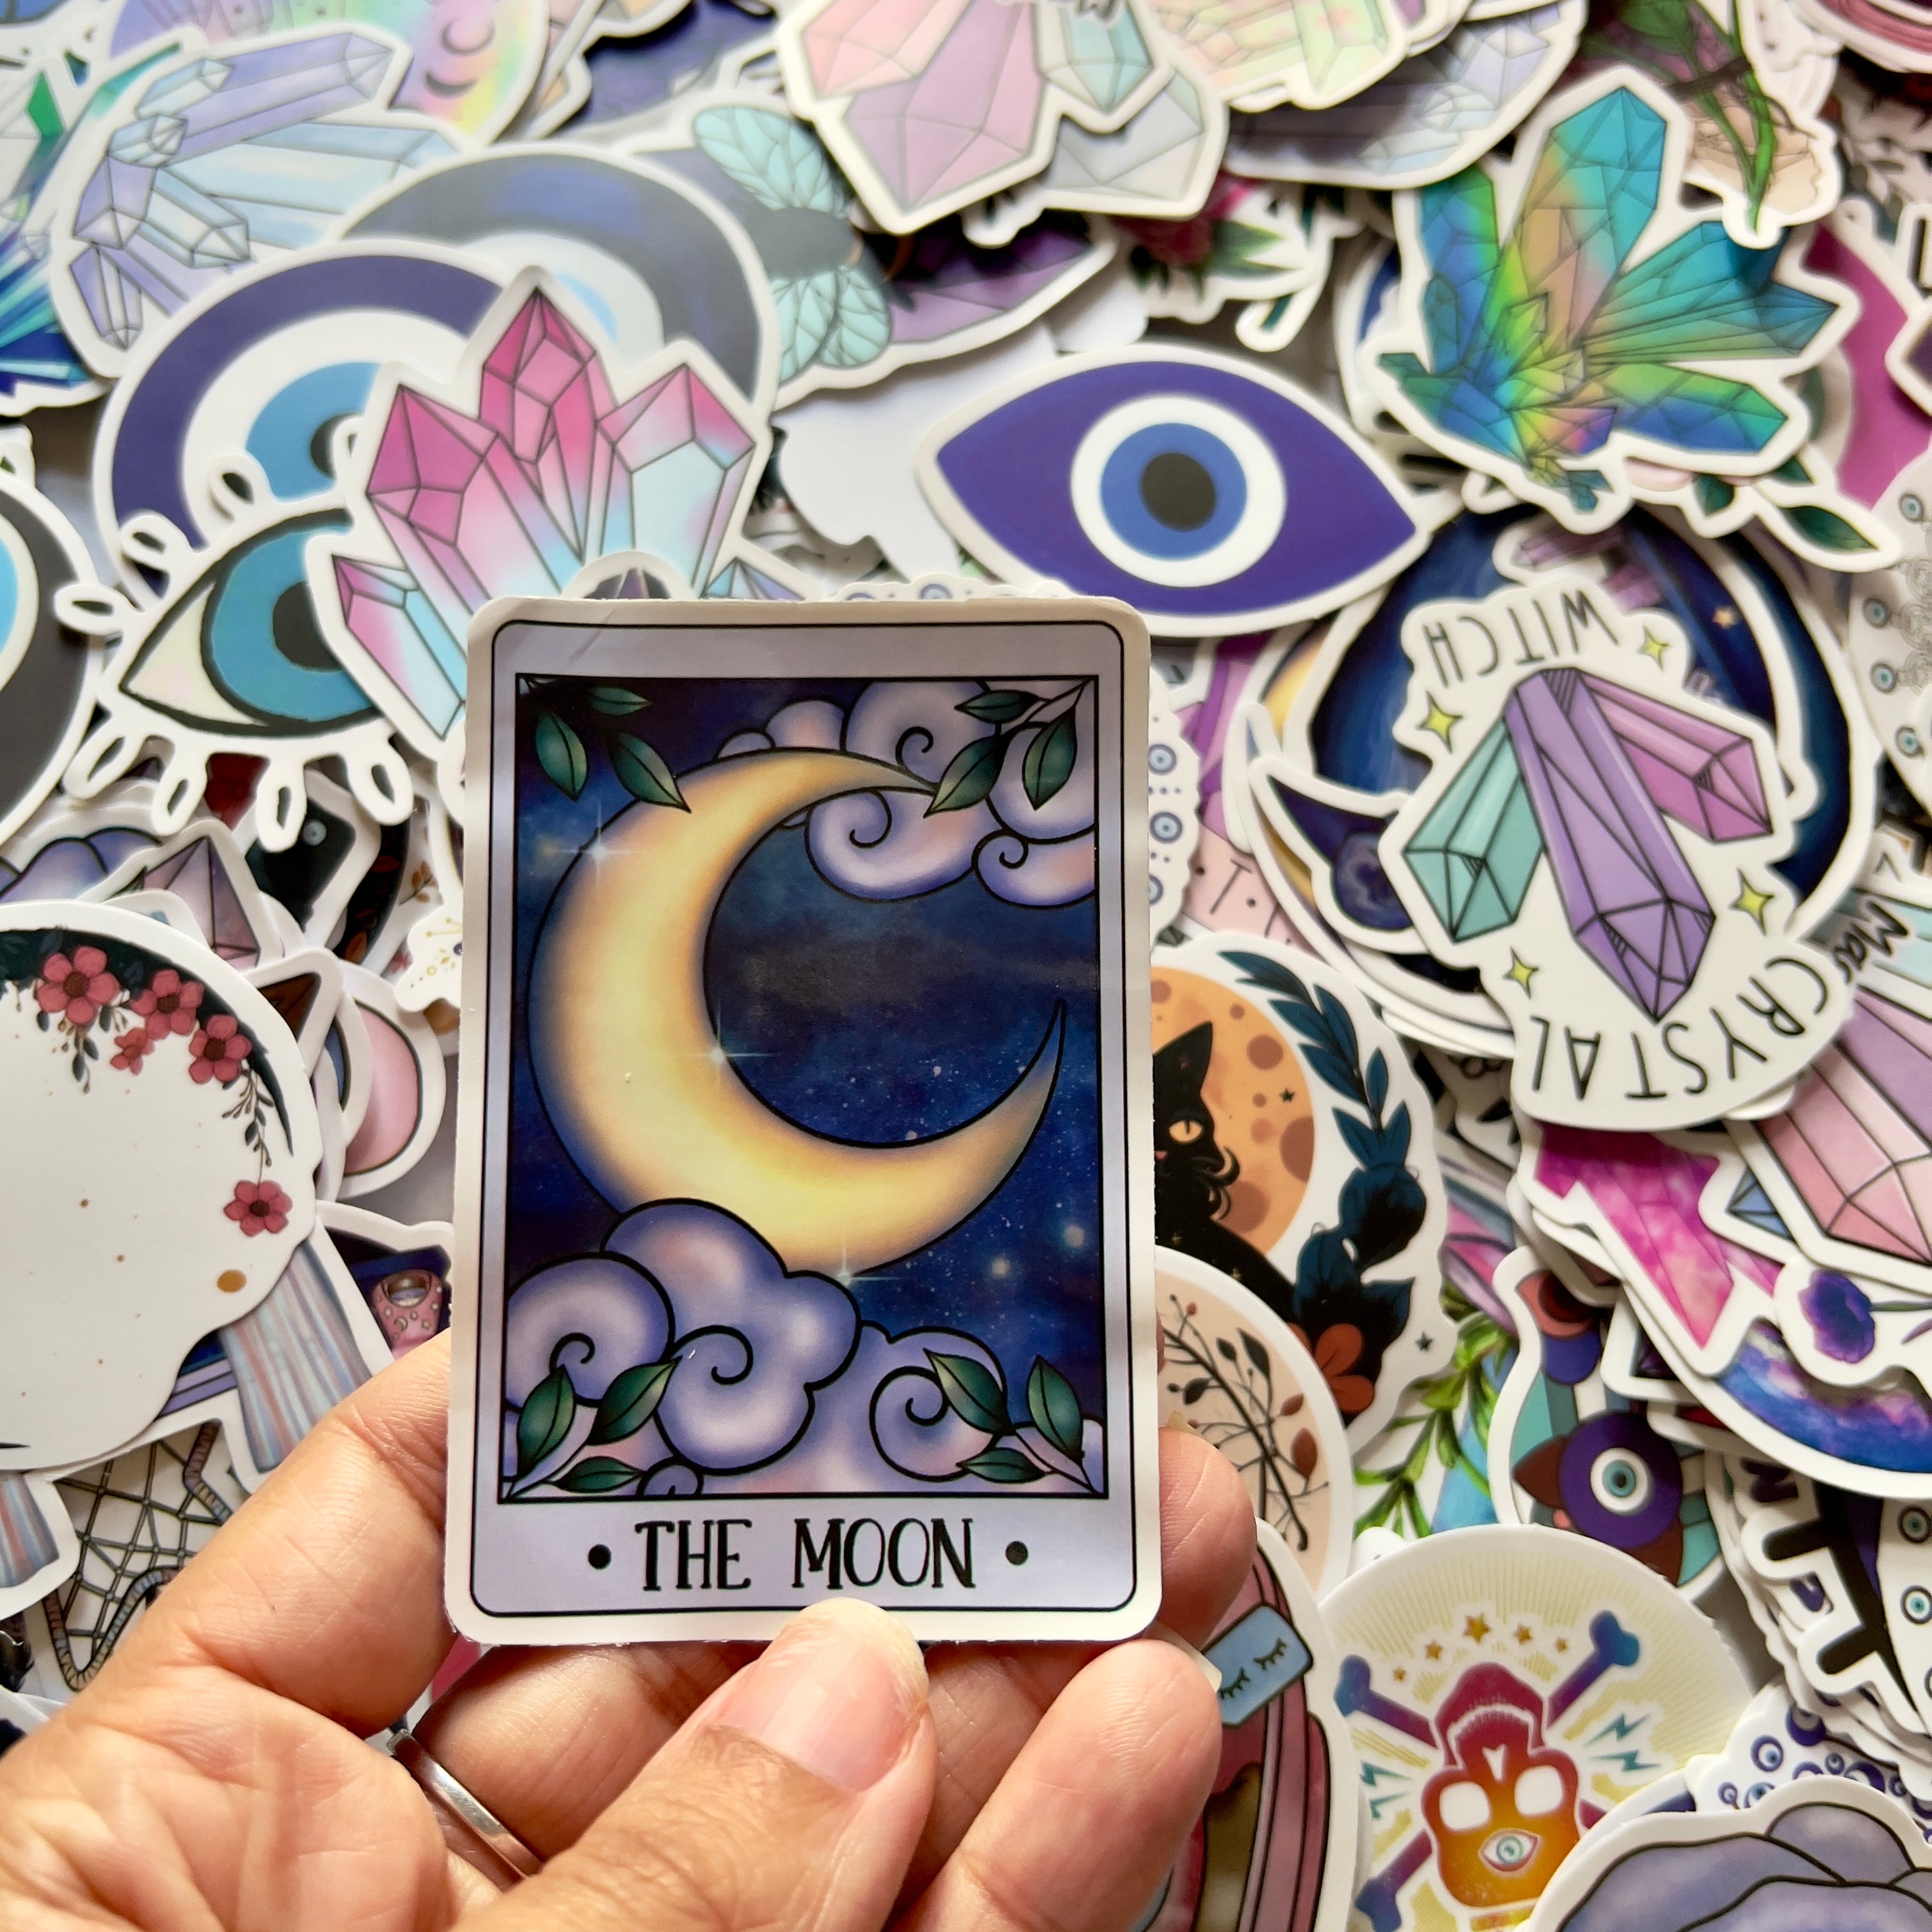 Witchy Stickers, Spiritual Confetti Stickers, Crystals, Black Cat, Boho Aesthetic, Mystery Evil Eye Moon Stars, Tarot Card Stickers